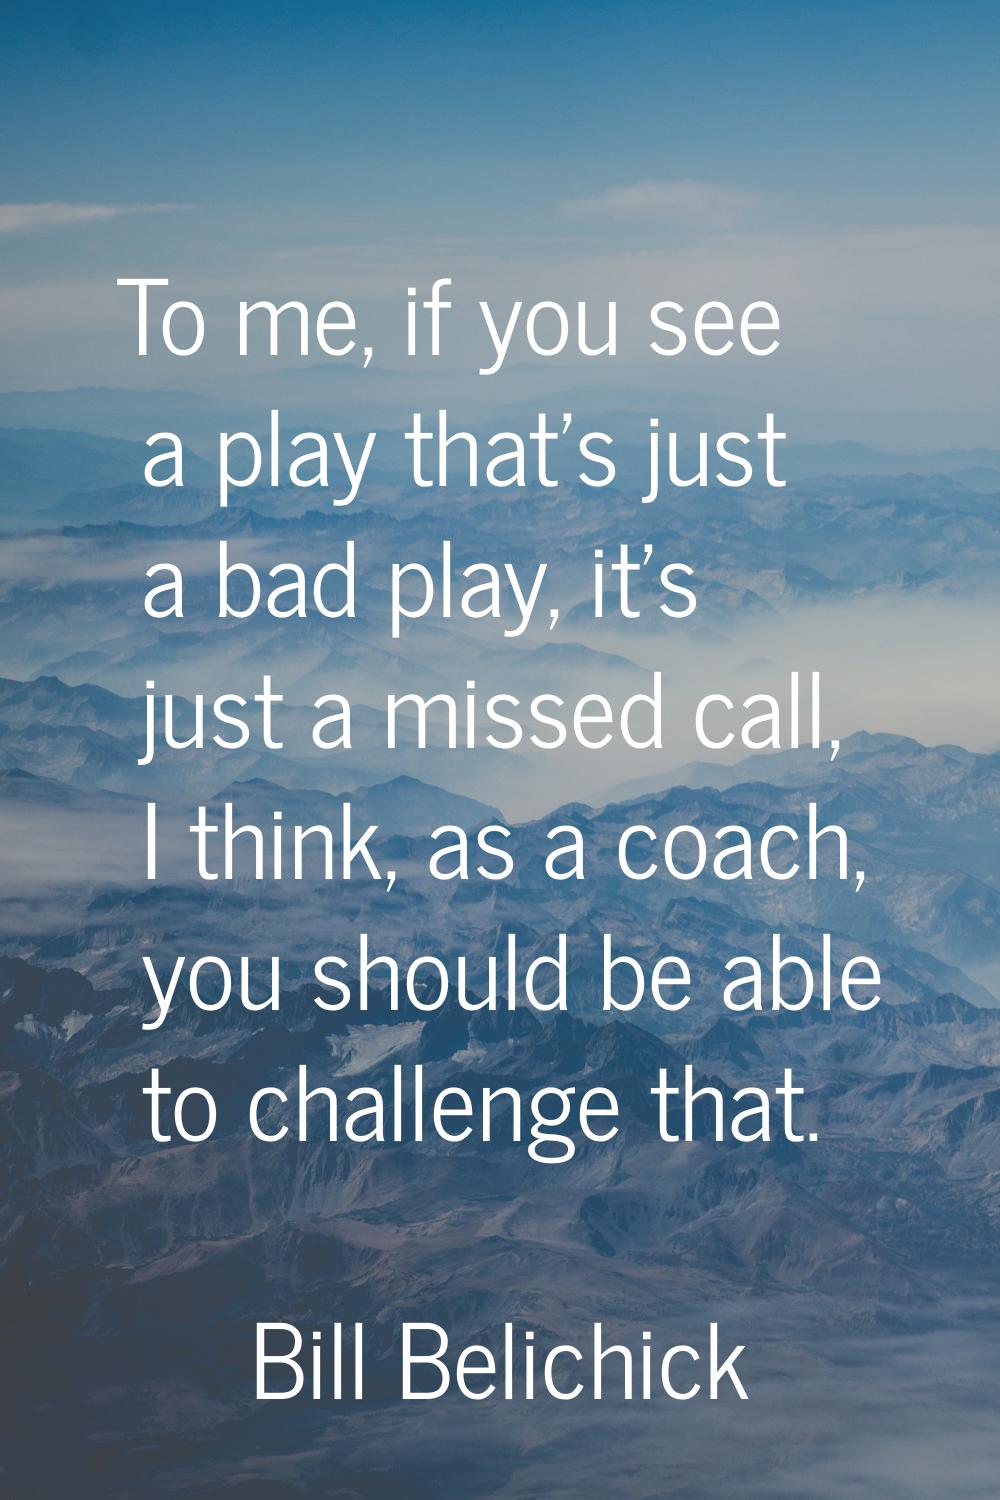 To me, if you see a play that's just a bad play, it's just a missed call, I think, as a coach, you 